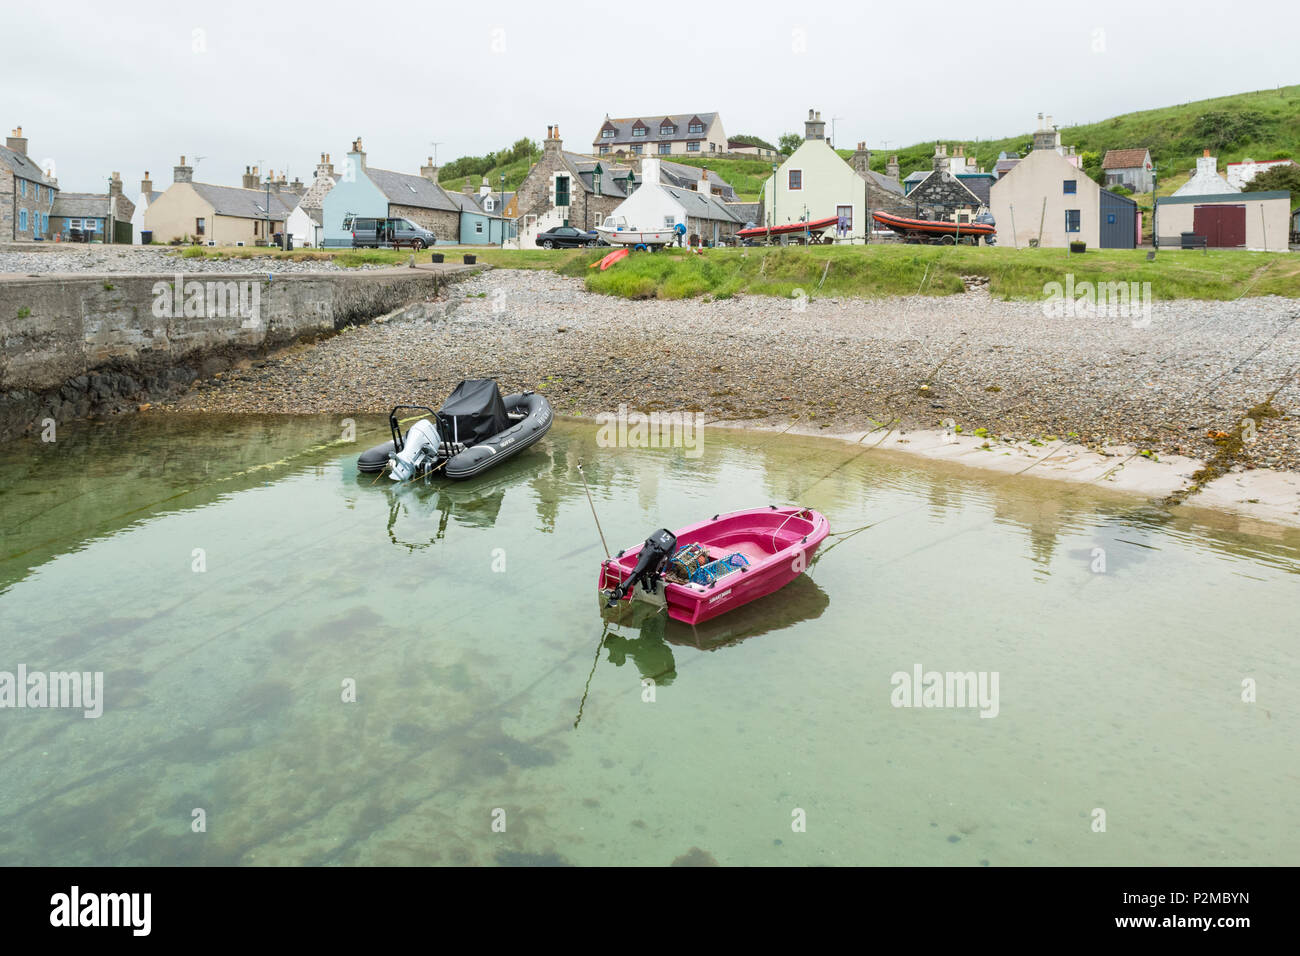 Sandend harbour.  Sandend is an old fishing village on the Moray Firth Coast, Aberdeenshire, Scotland, UK Stock Photo